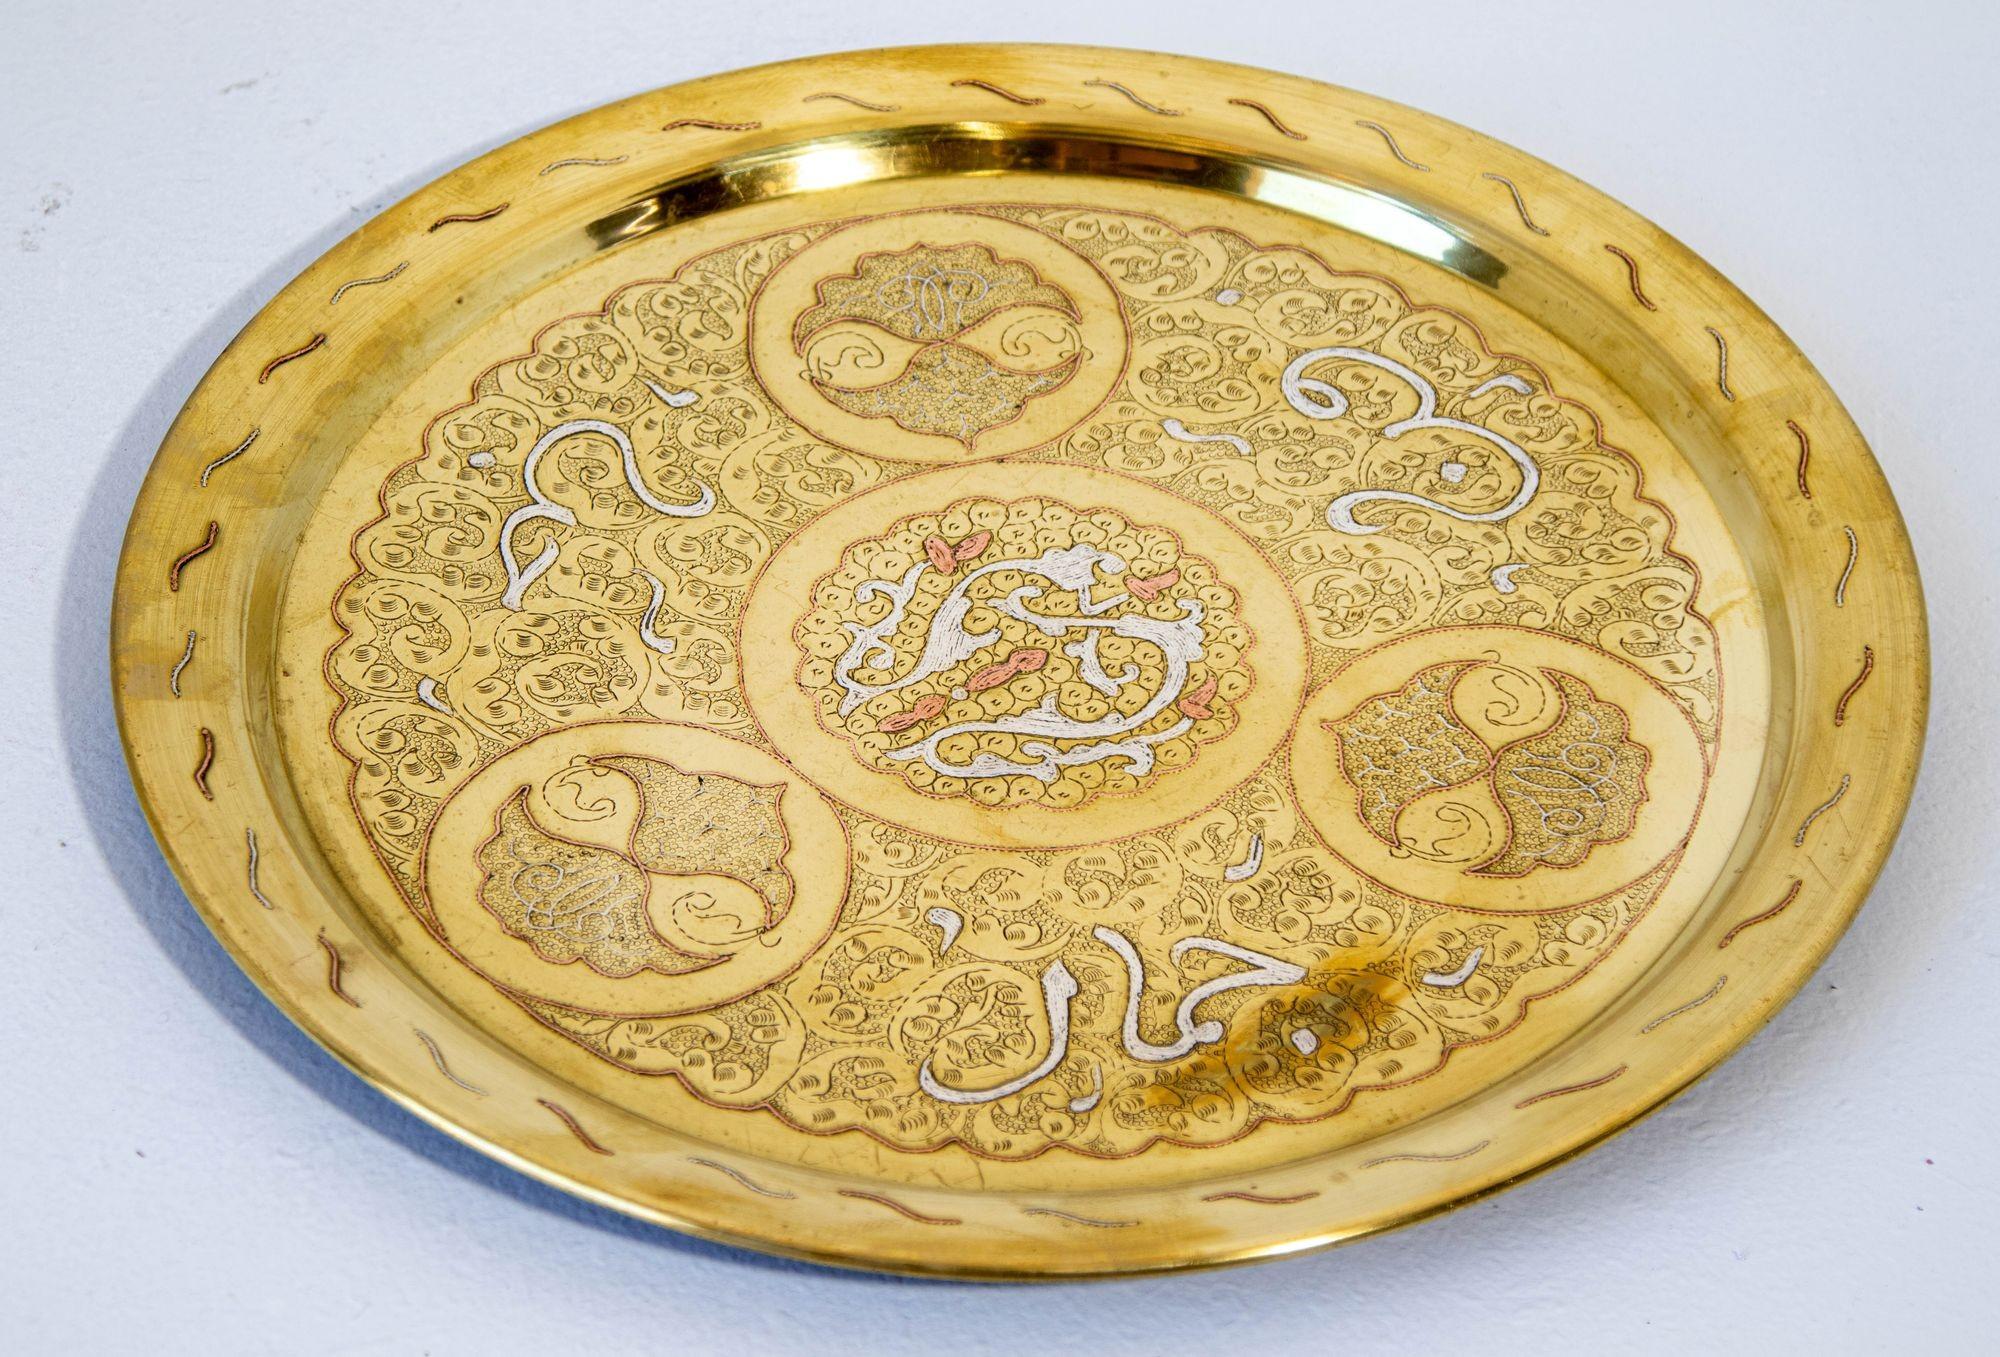 Antique Egyptian Round Brass Tray with Silver and Copper Overlay 17.25 inches In Good Condition For Sale In North Hollywood, CA